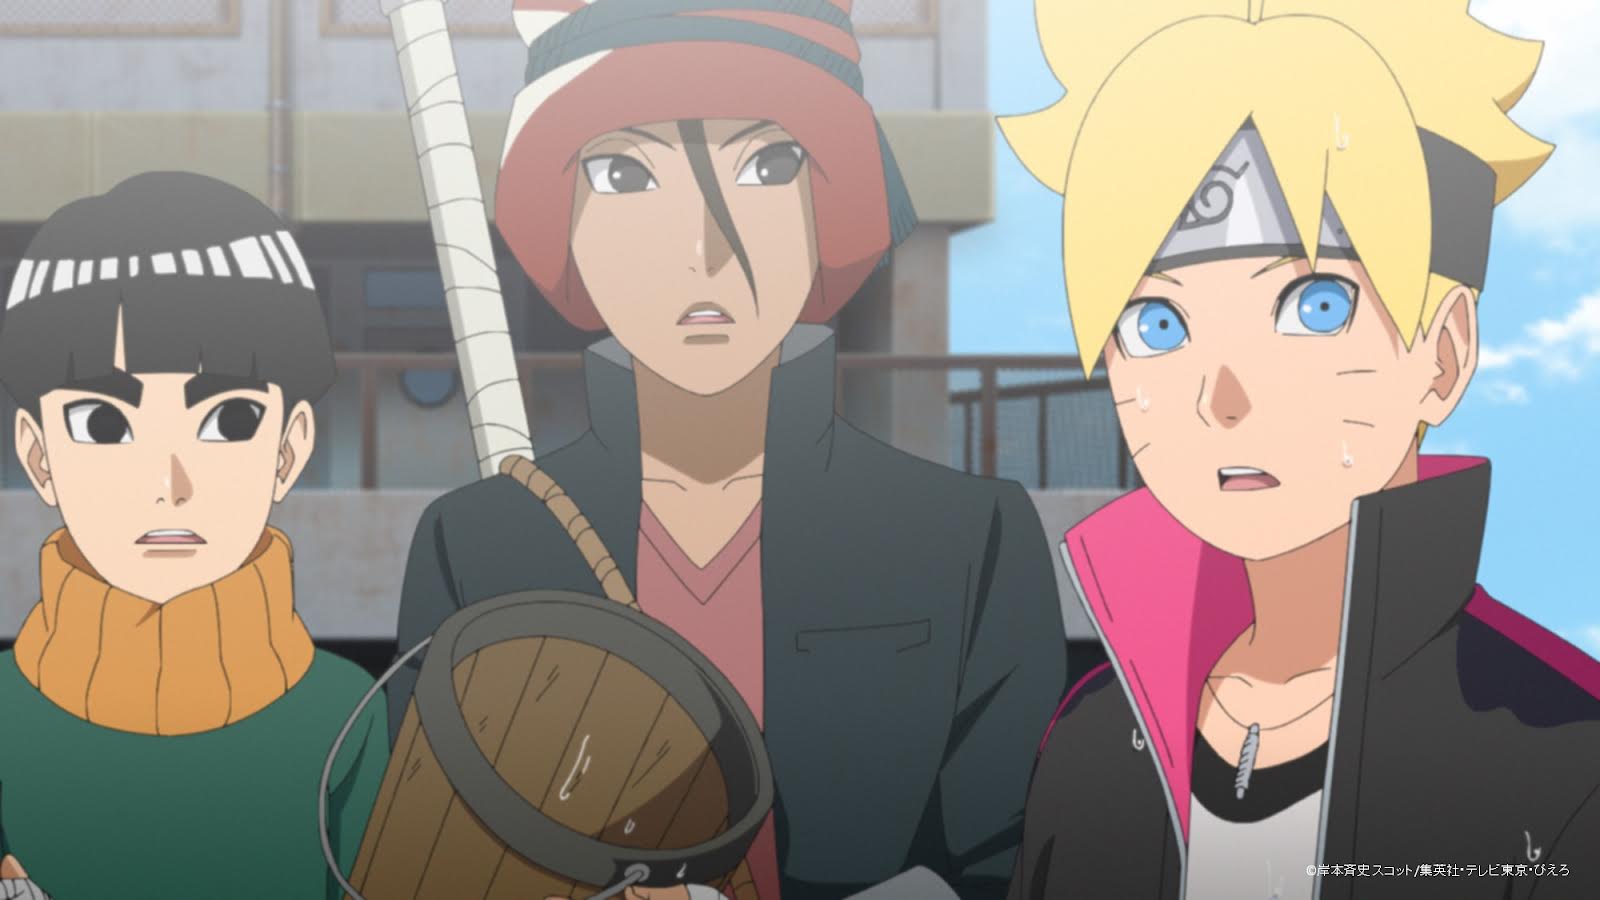 Official Boruto Twitter Warns About Unofficial Naruto NFTs